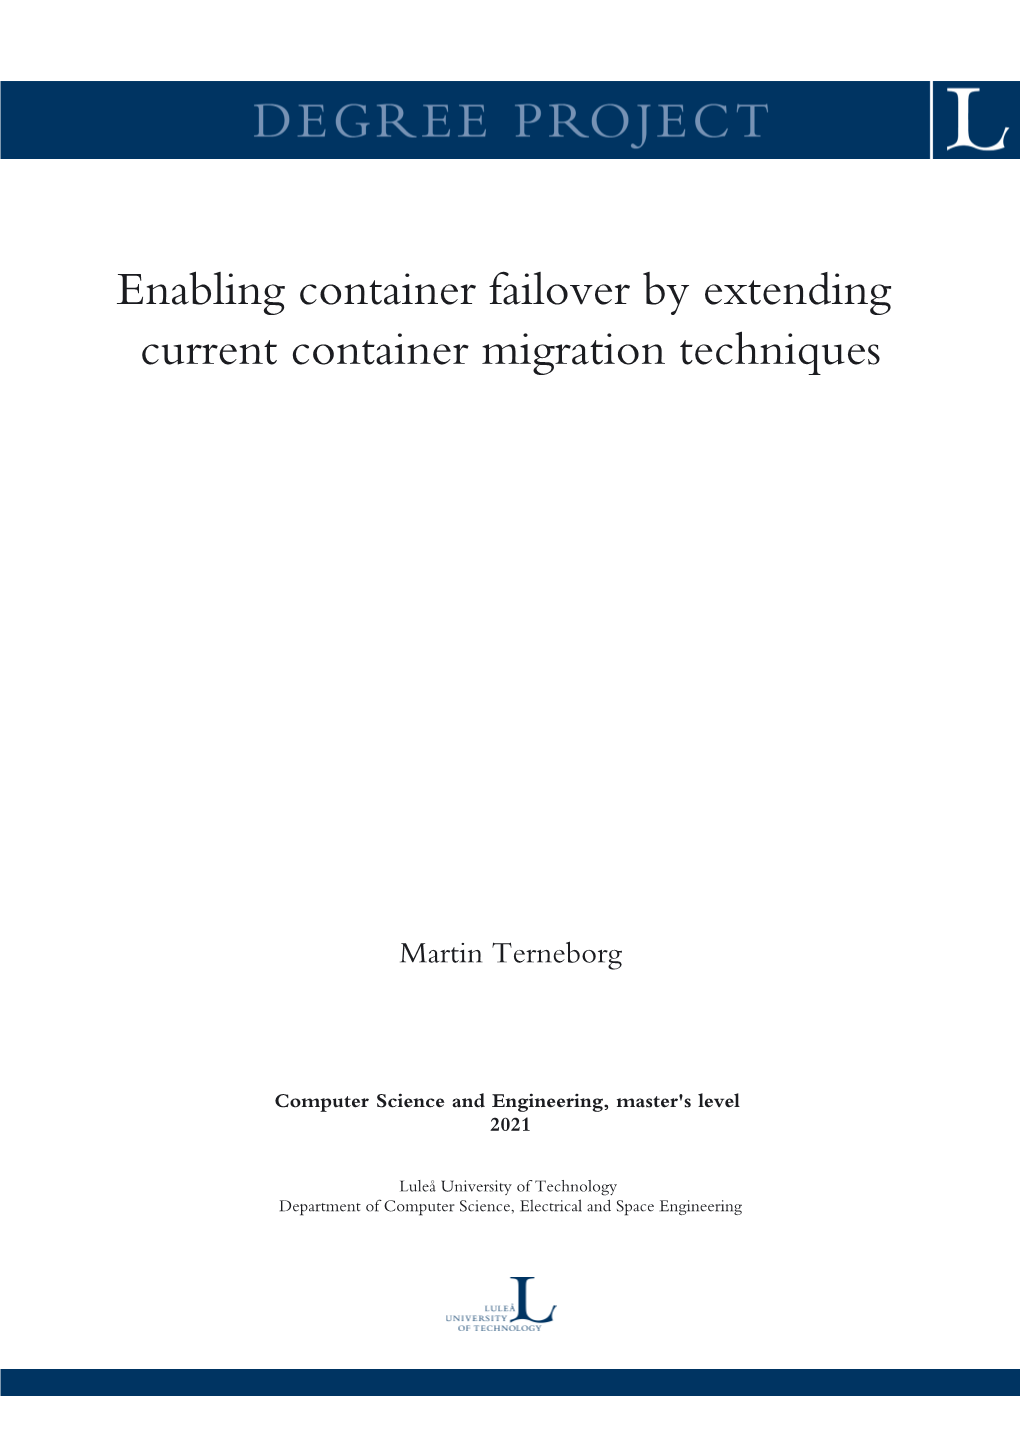 Enabling Container Failover by Extending Current Container Migration Techniques